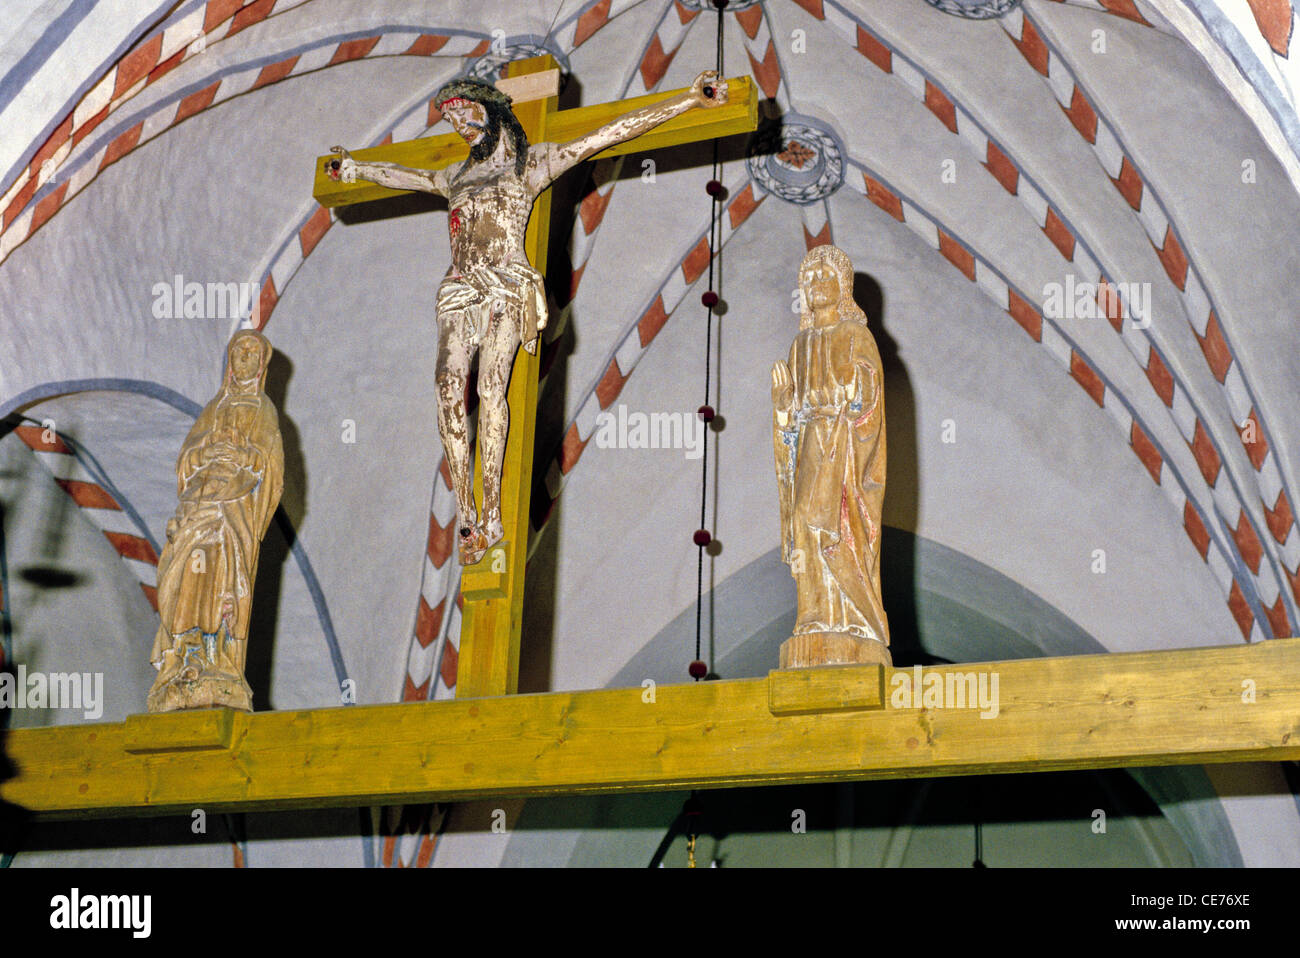 A crucifixion scene in the medieval church of St. Peter's in Lieto, Finland Stock Photo